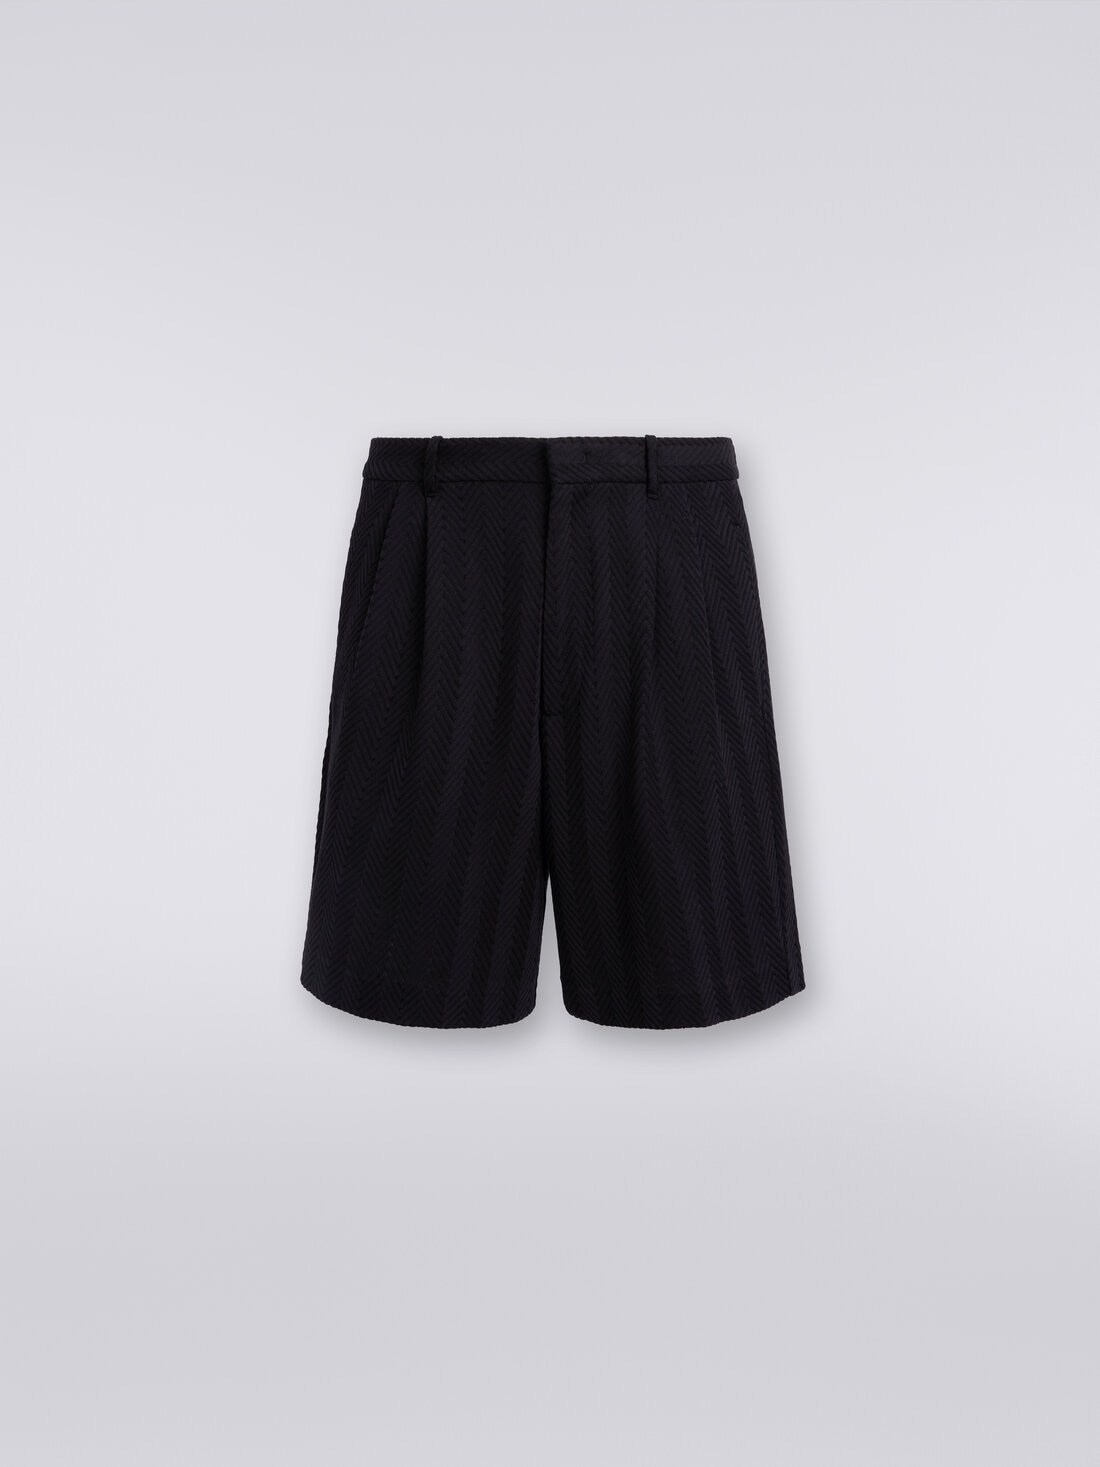 Shorts in zigzag viscose and cotton, Black    - US24SI0ABR00JC93911 - 0